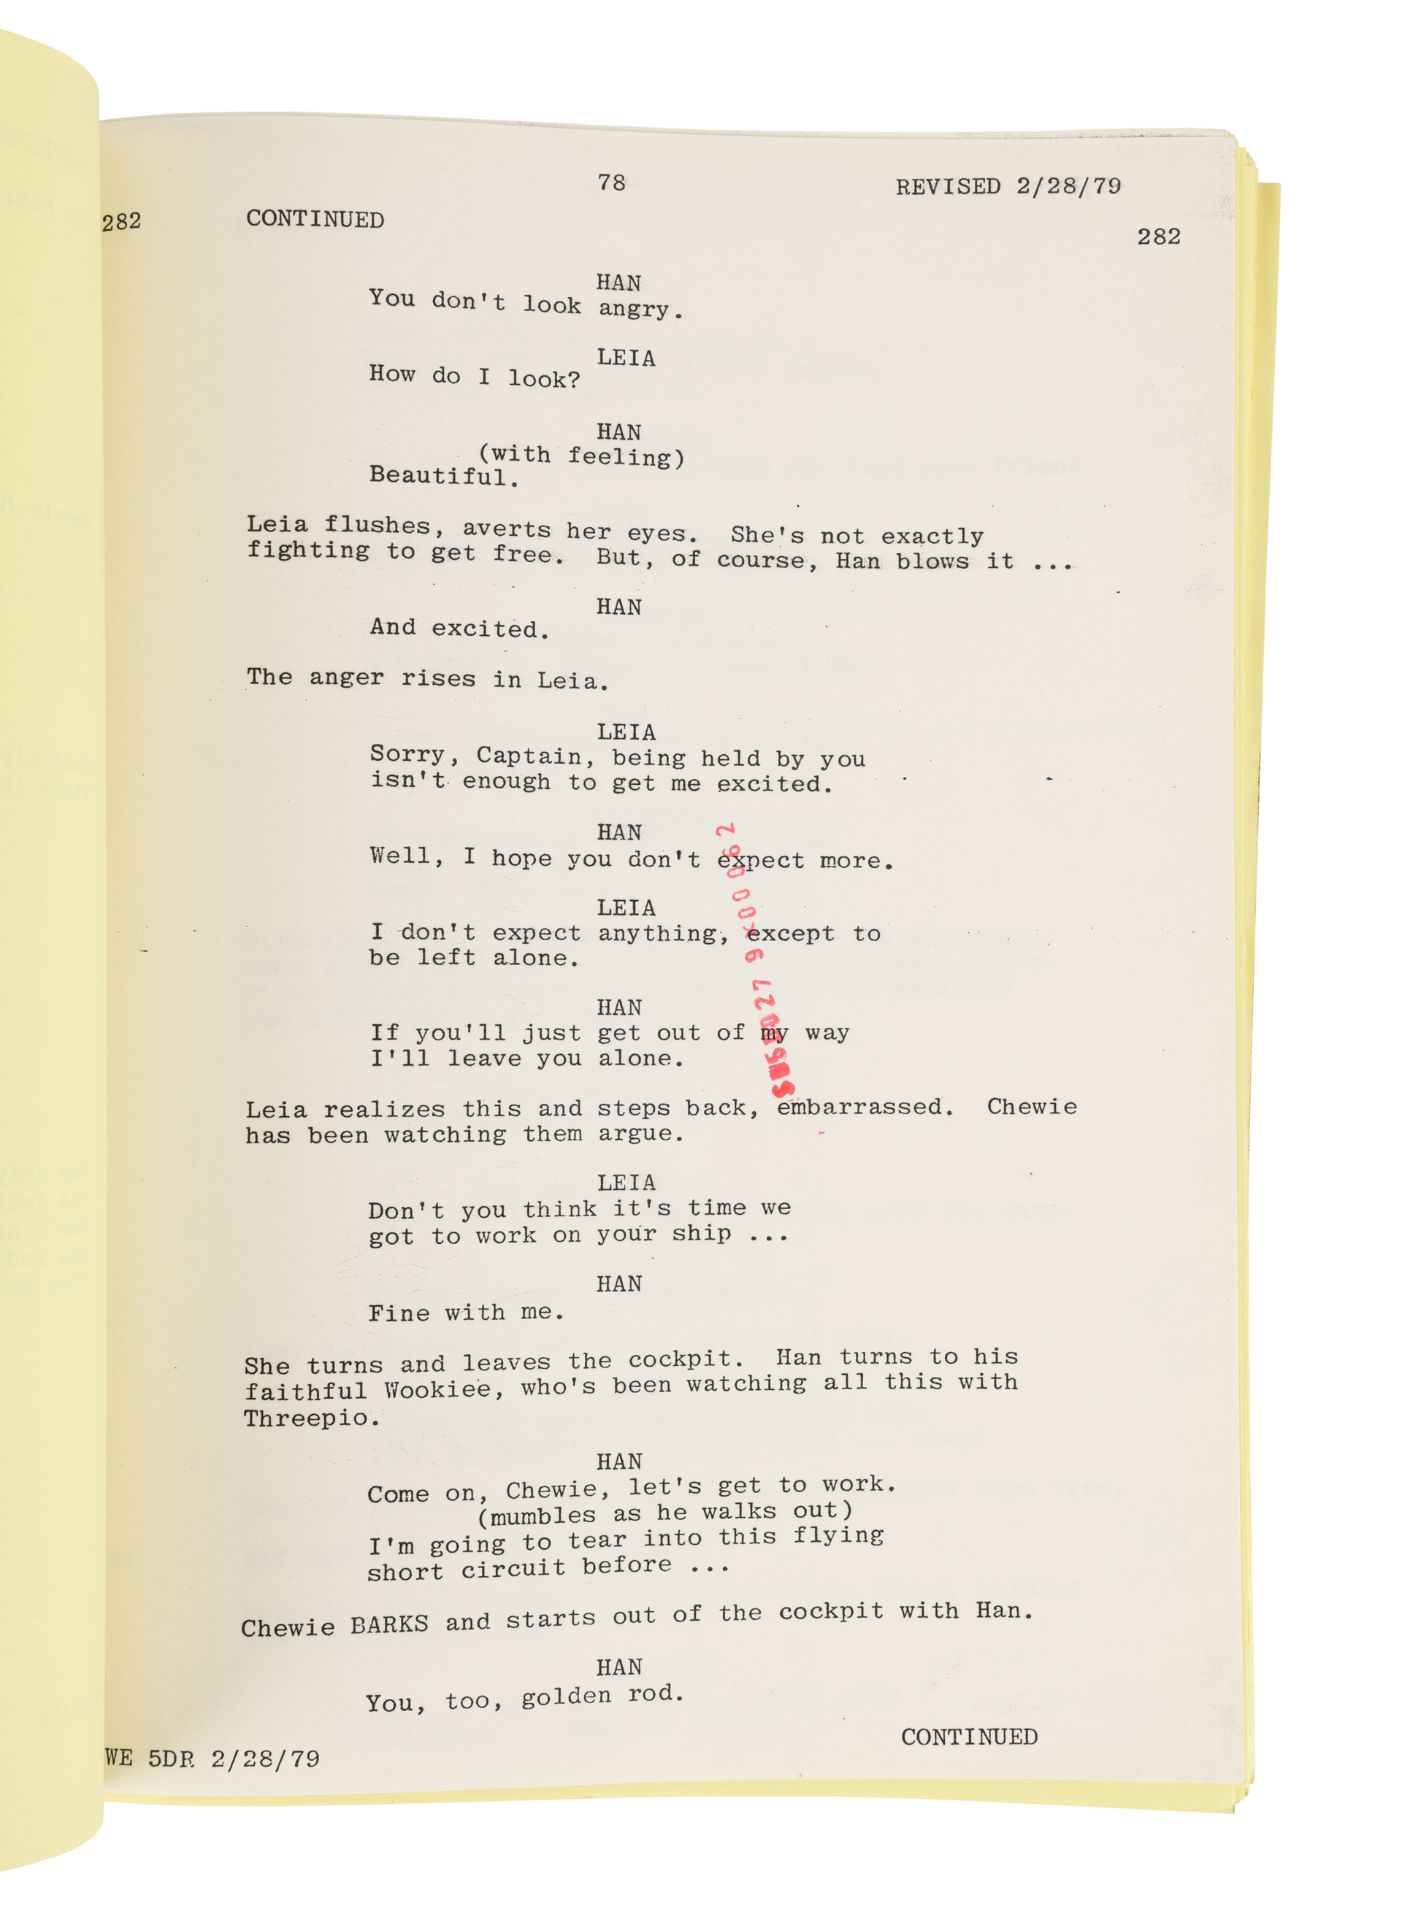 STAR WARS: THE EMPIRE STRIKES BACK (1980) - Anthony Daniels Collection: Hand-annotated Partial Scrip - Image 6 of 12